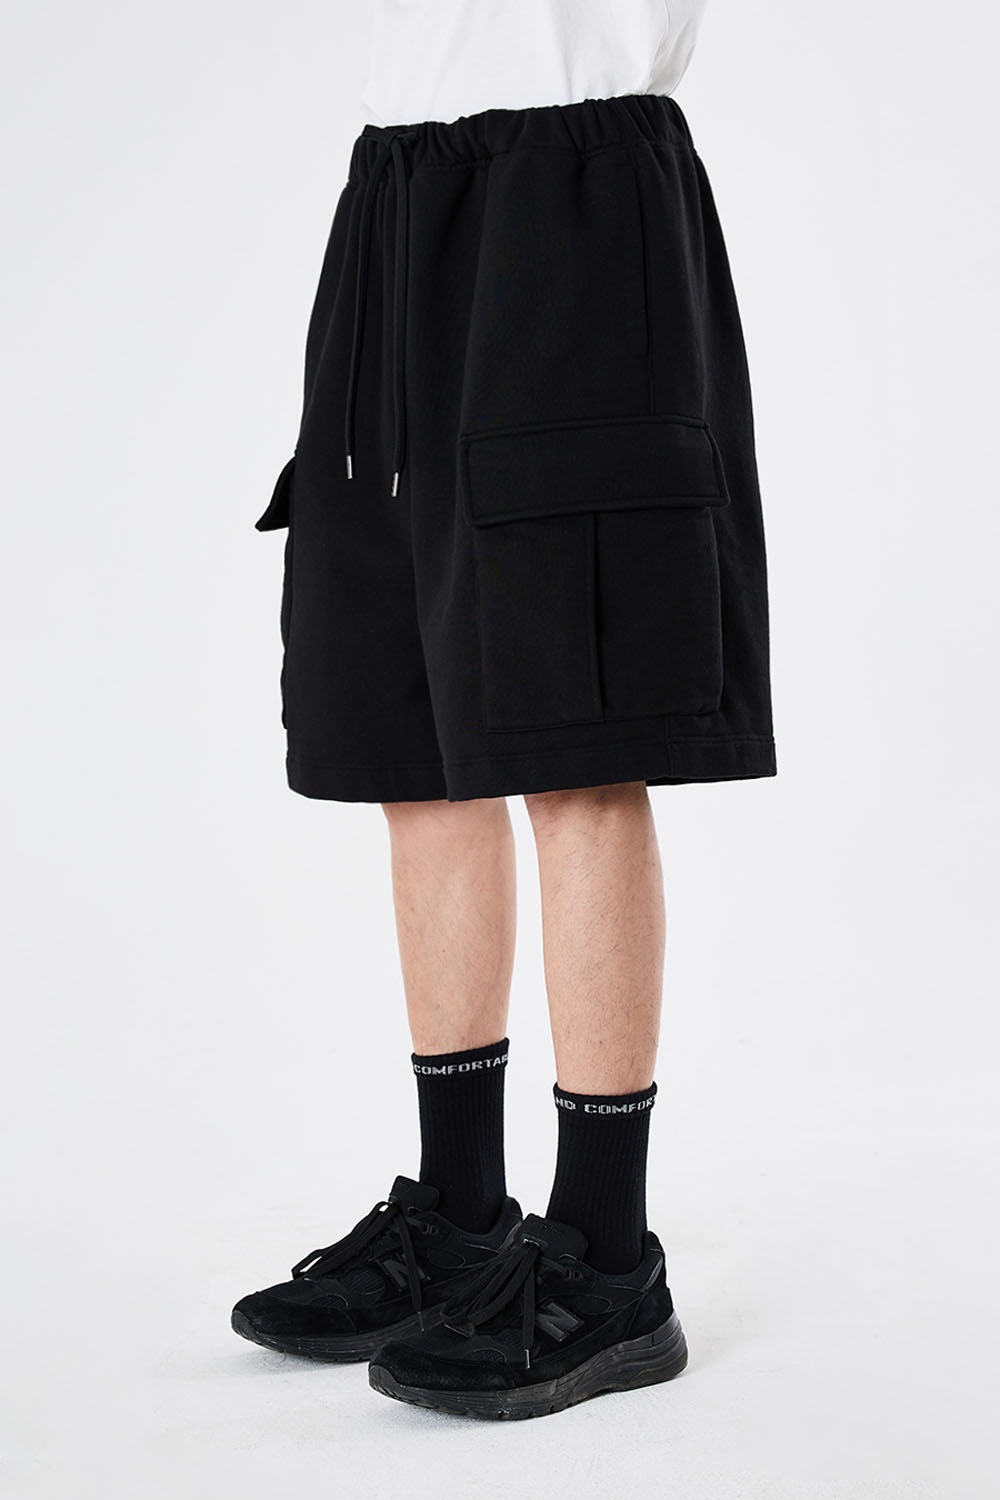 Over Mil Sweat Shorts-Black